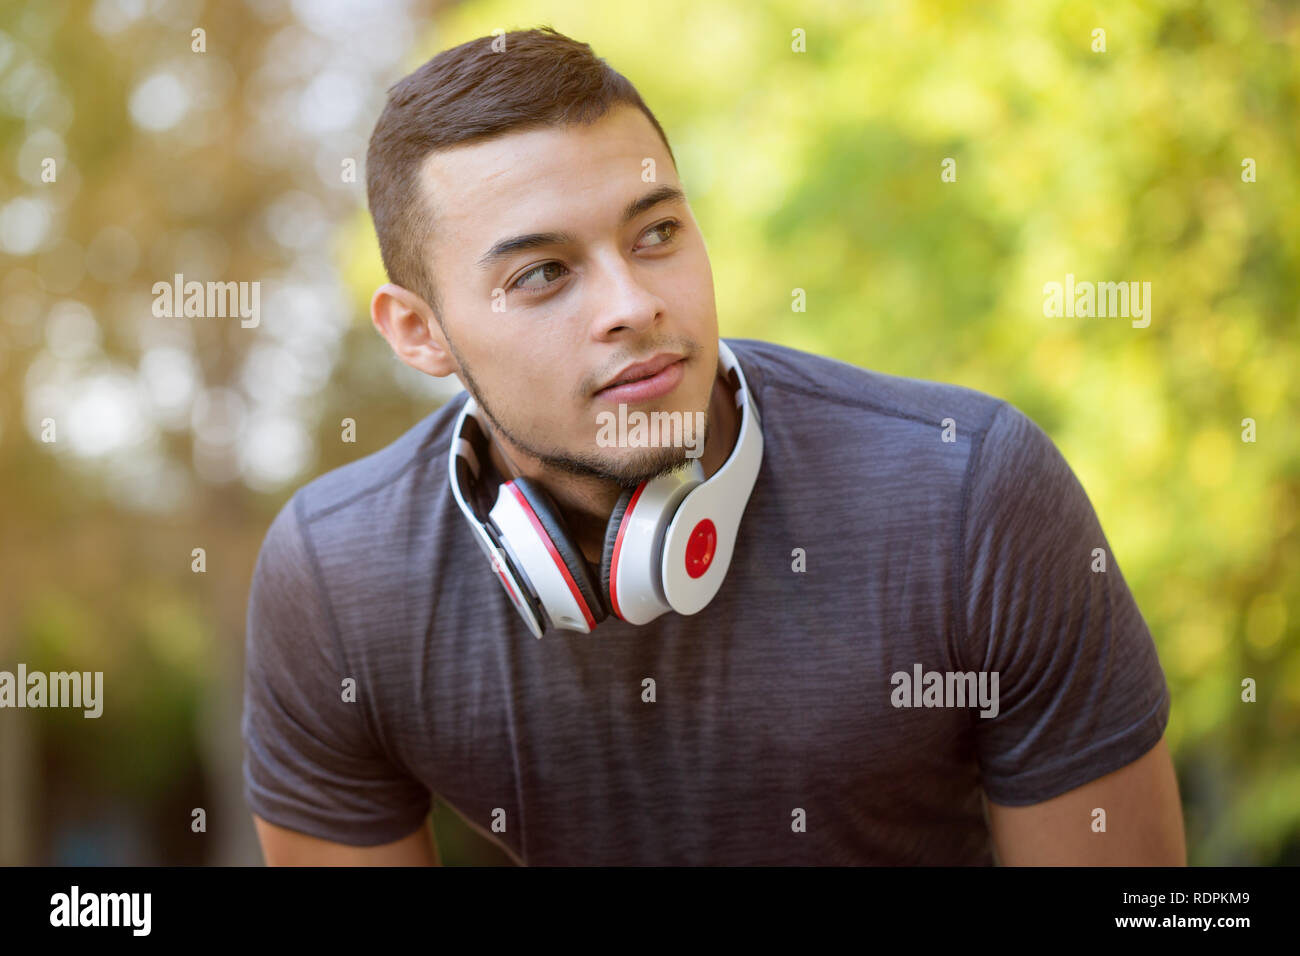 Young latin man runner looking thinking running jogging sports training fitness workout copyspace copy space outdoor Stock Photo